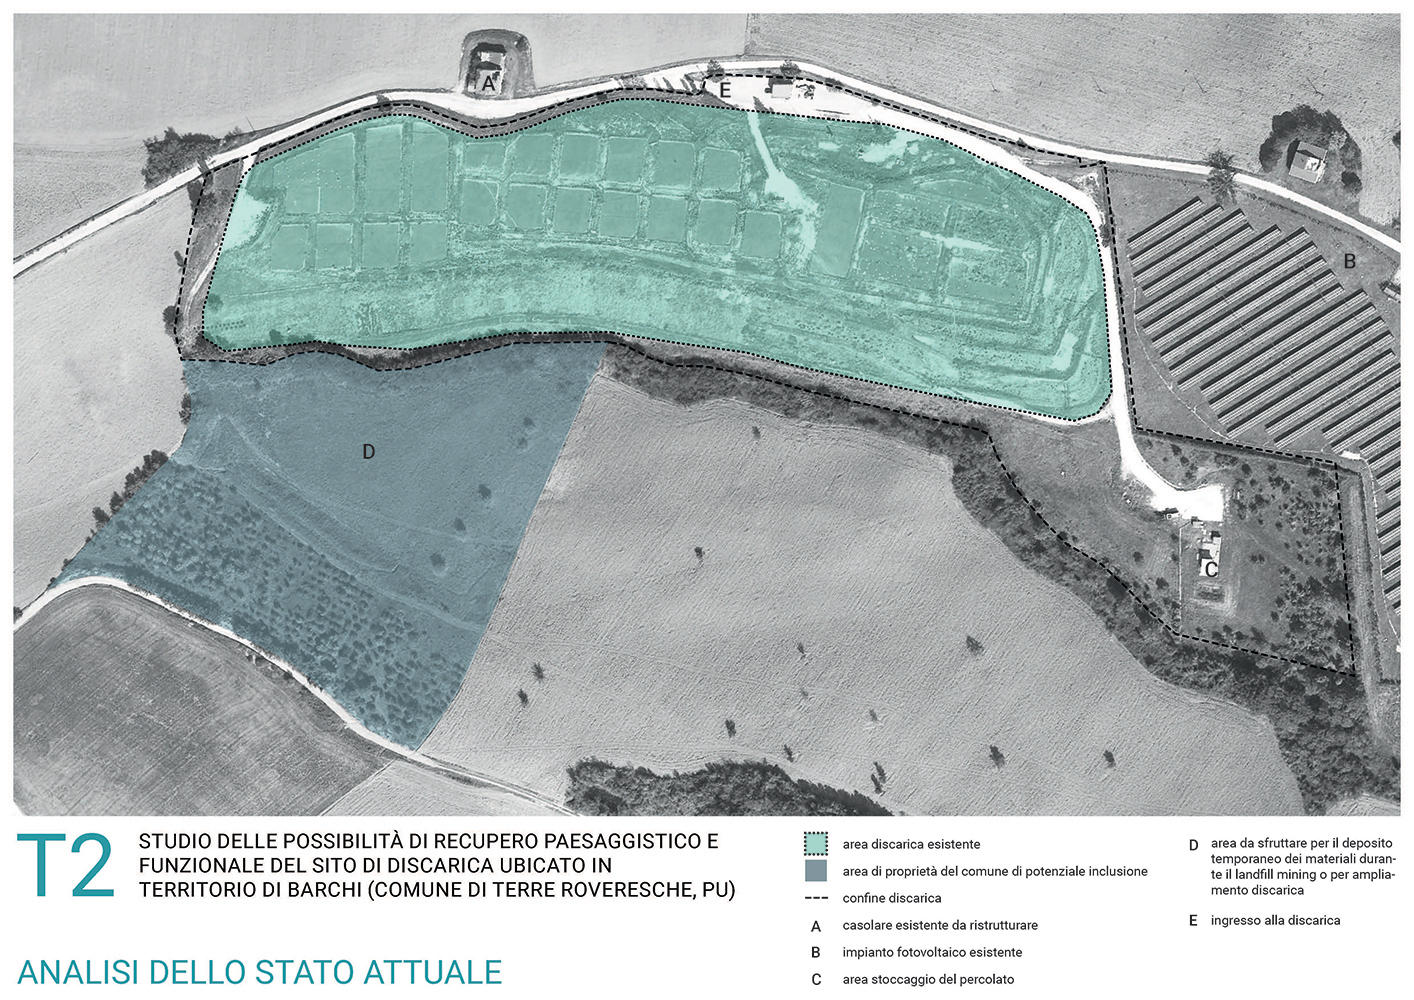 Landscape and functional requalification of the landfill of Ca’ Rafaneto, Barchi (PU)